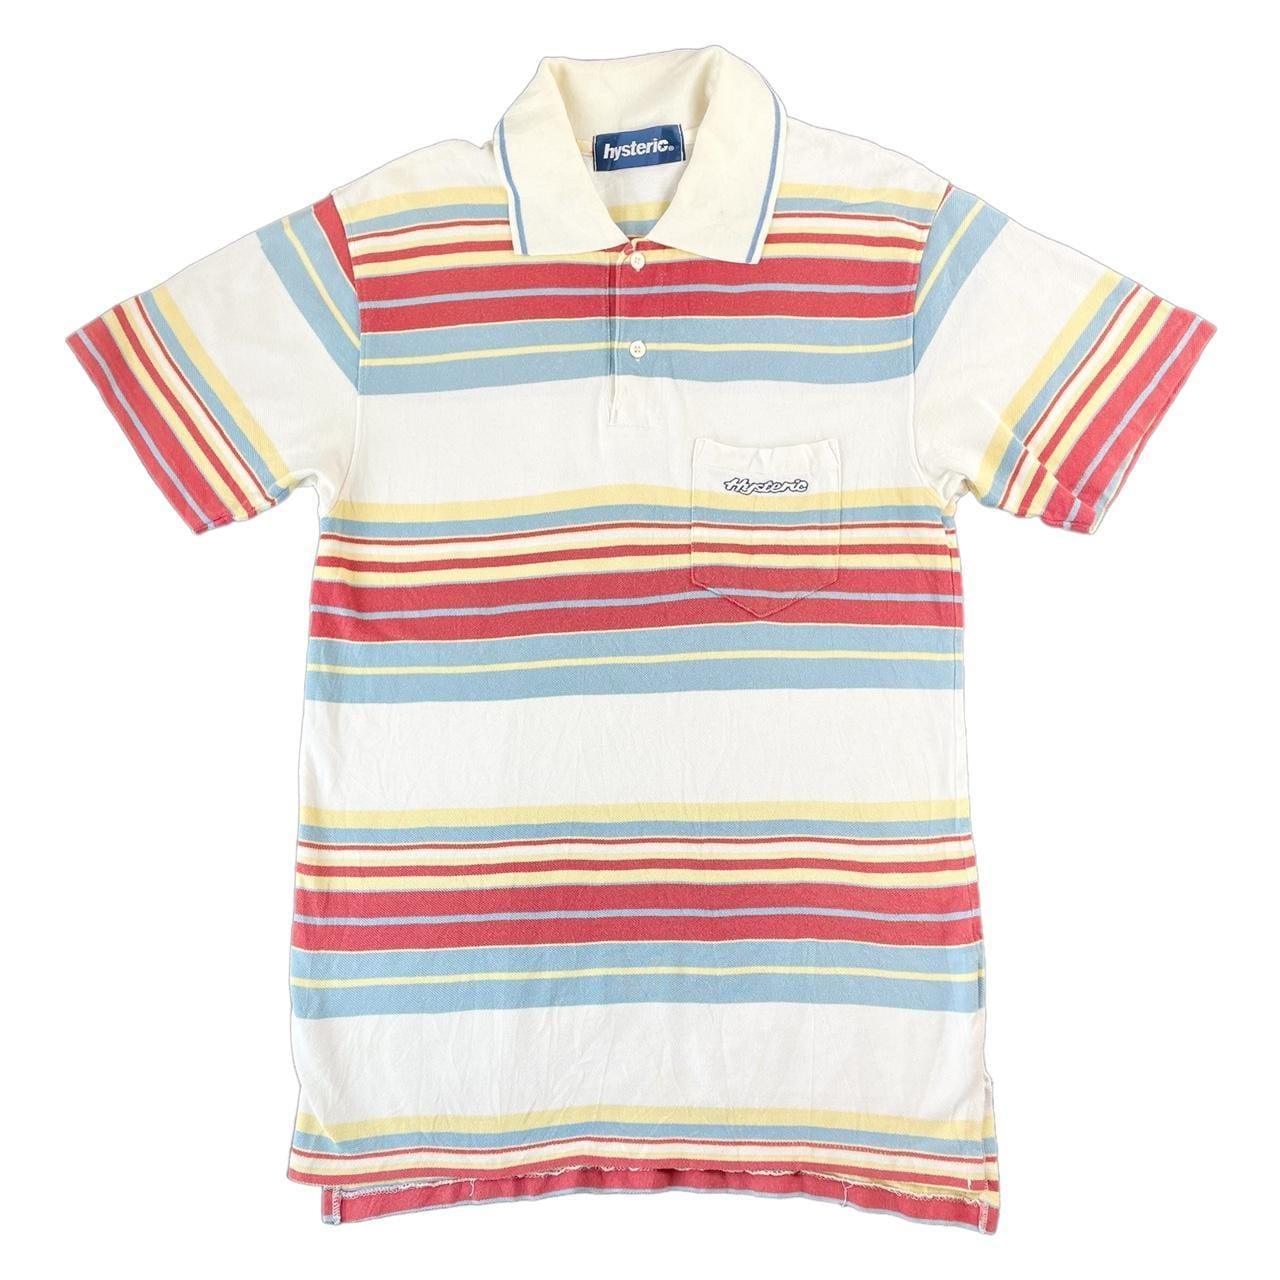 Vintage Hysteric Glamour striped polo shirt size S - Known Source